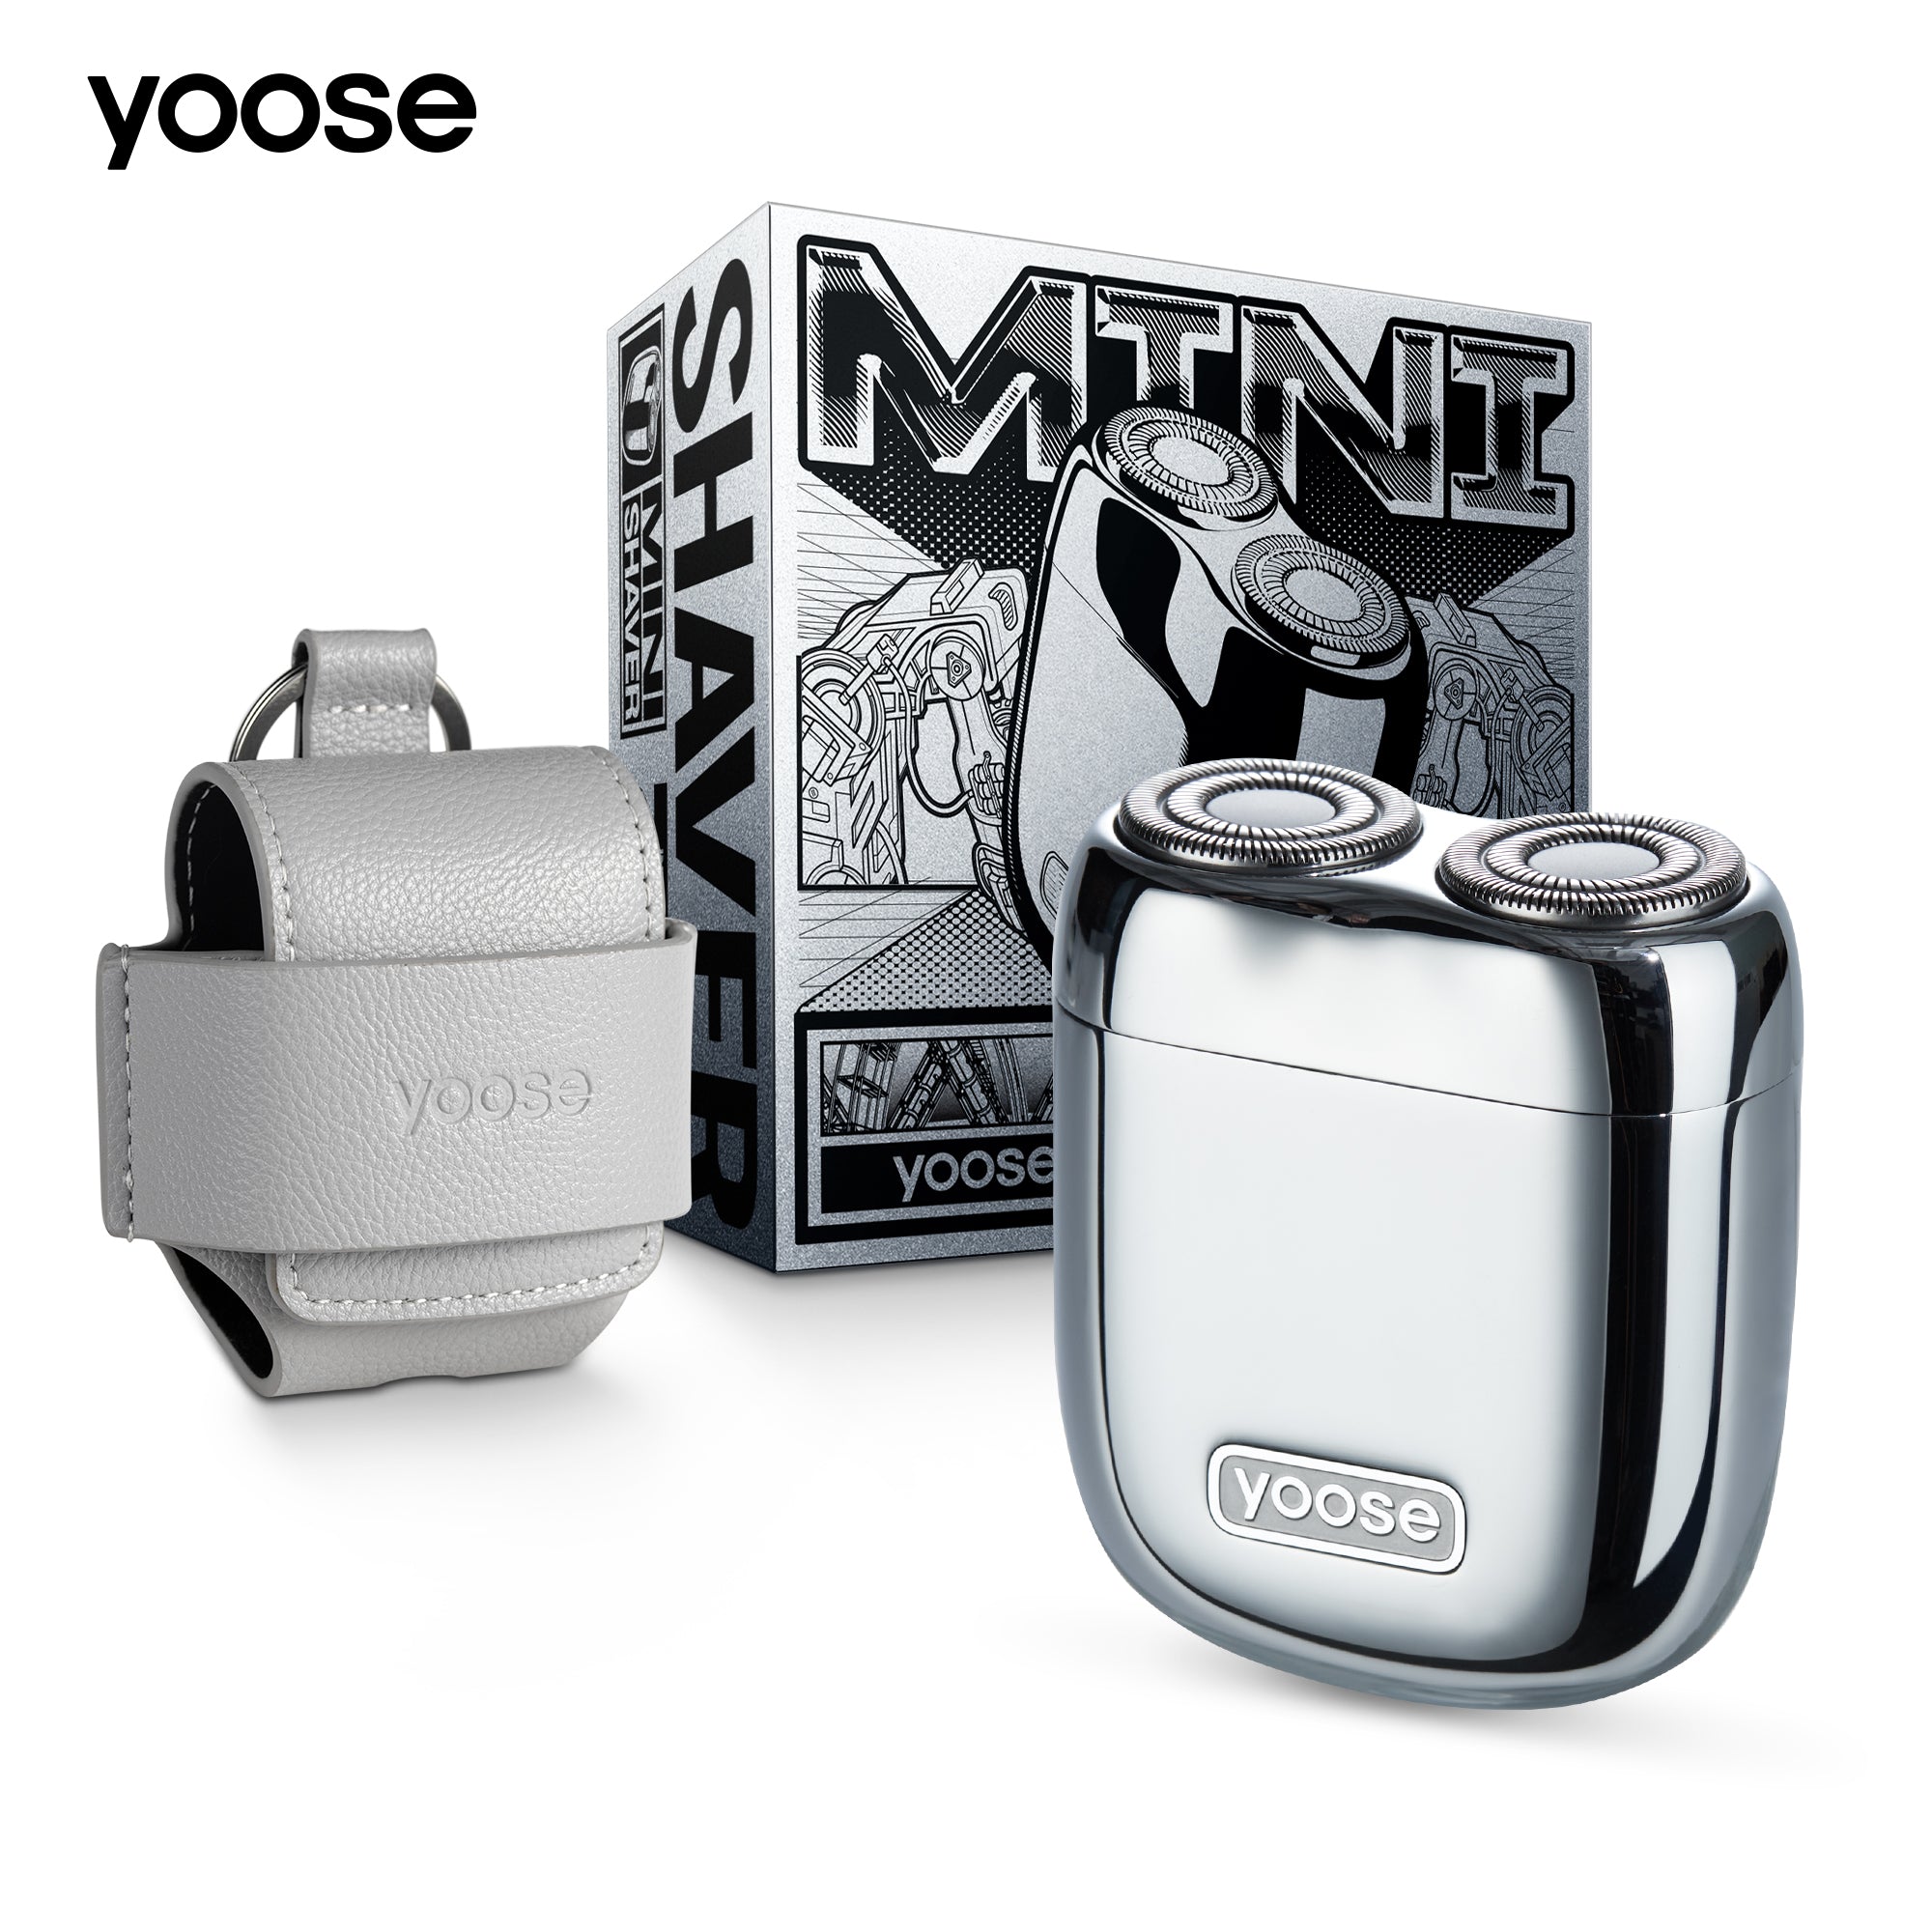 yoose MINI shaver what is includes _Silver color